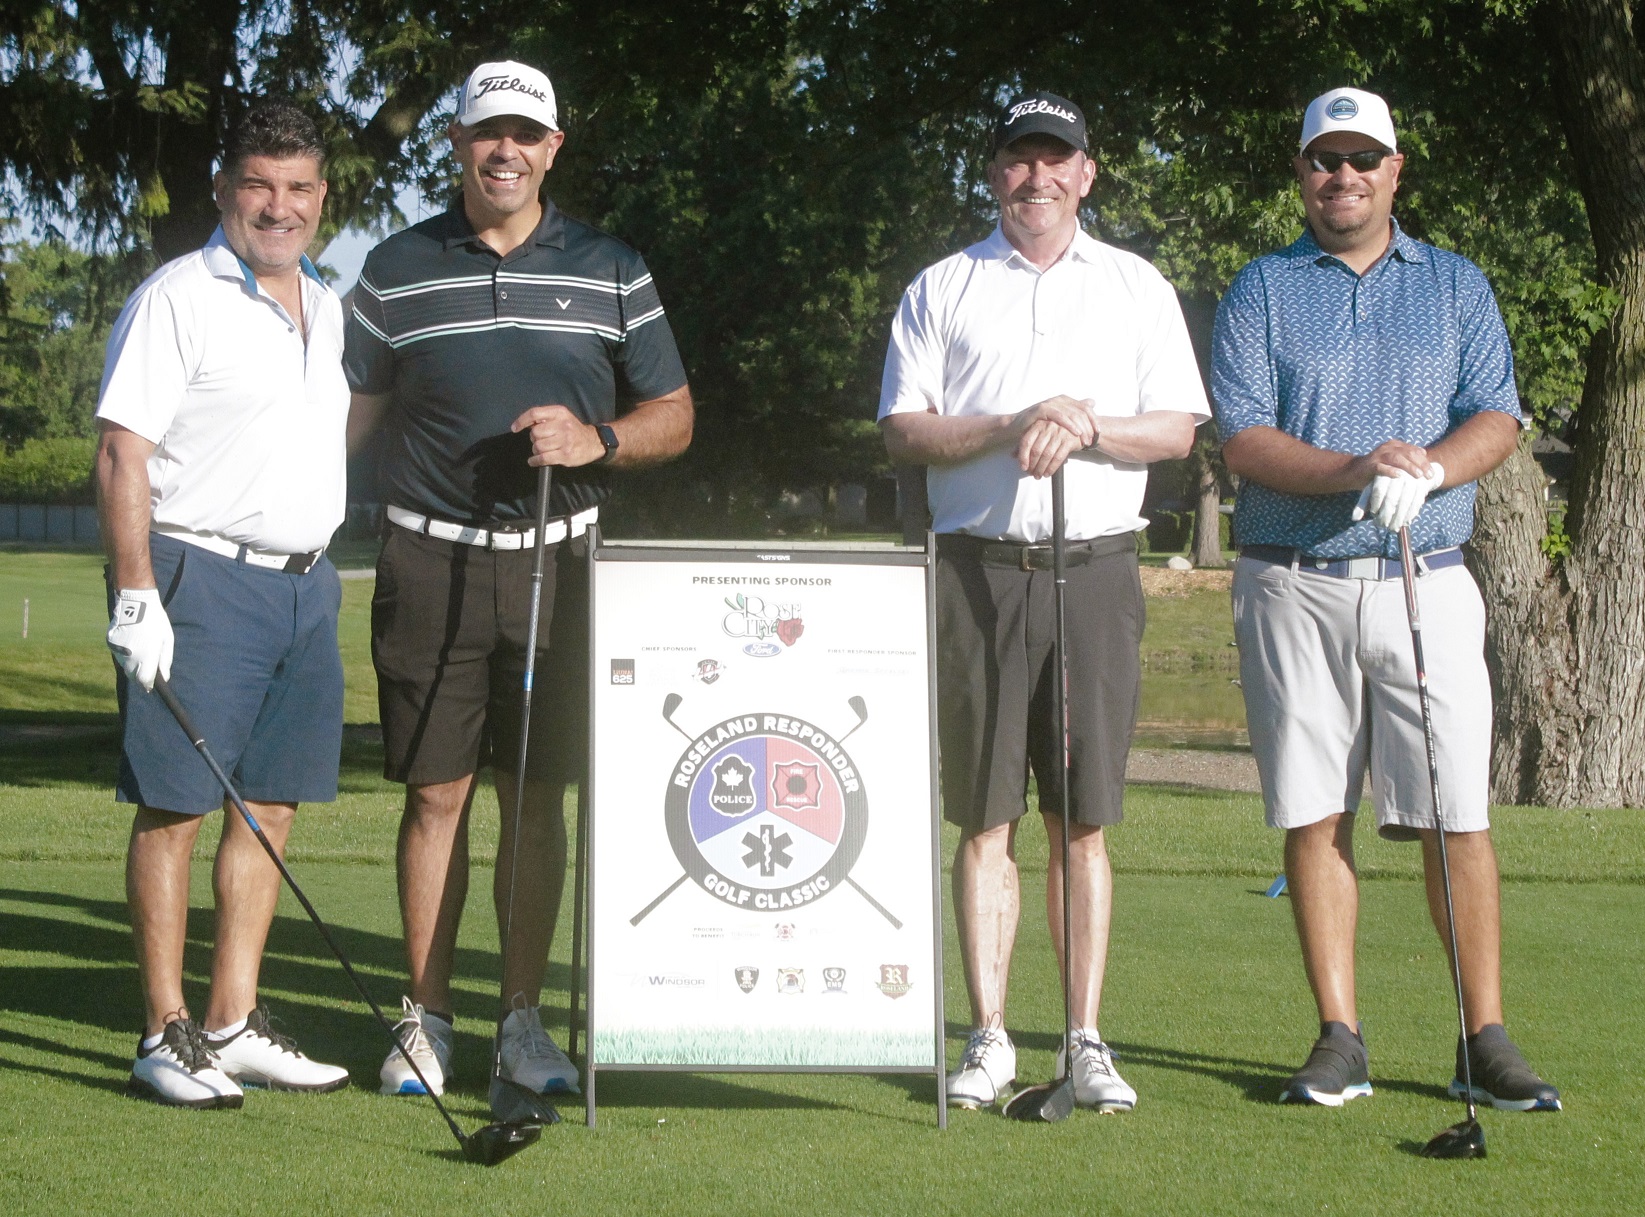 Four  men with golf clubs standing together with a Roseland Responder Golf Classic sign